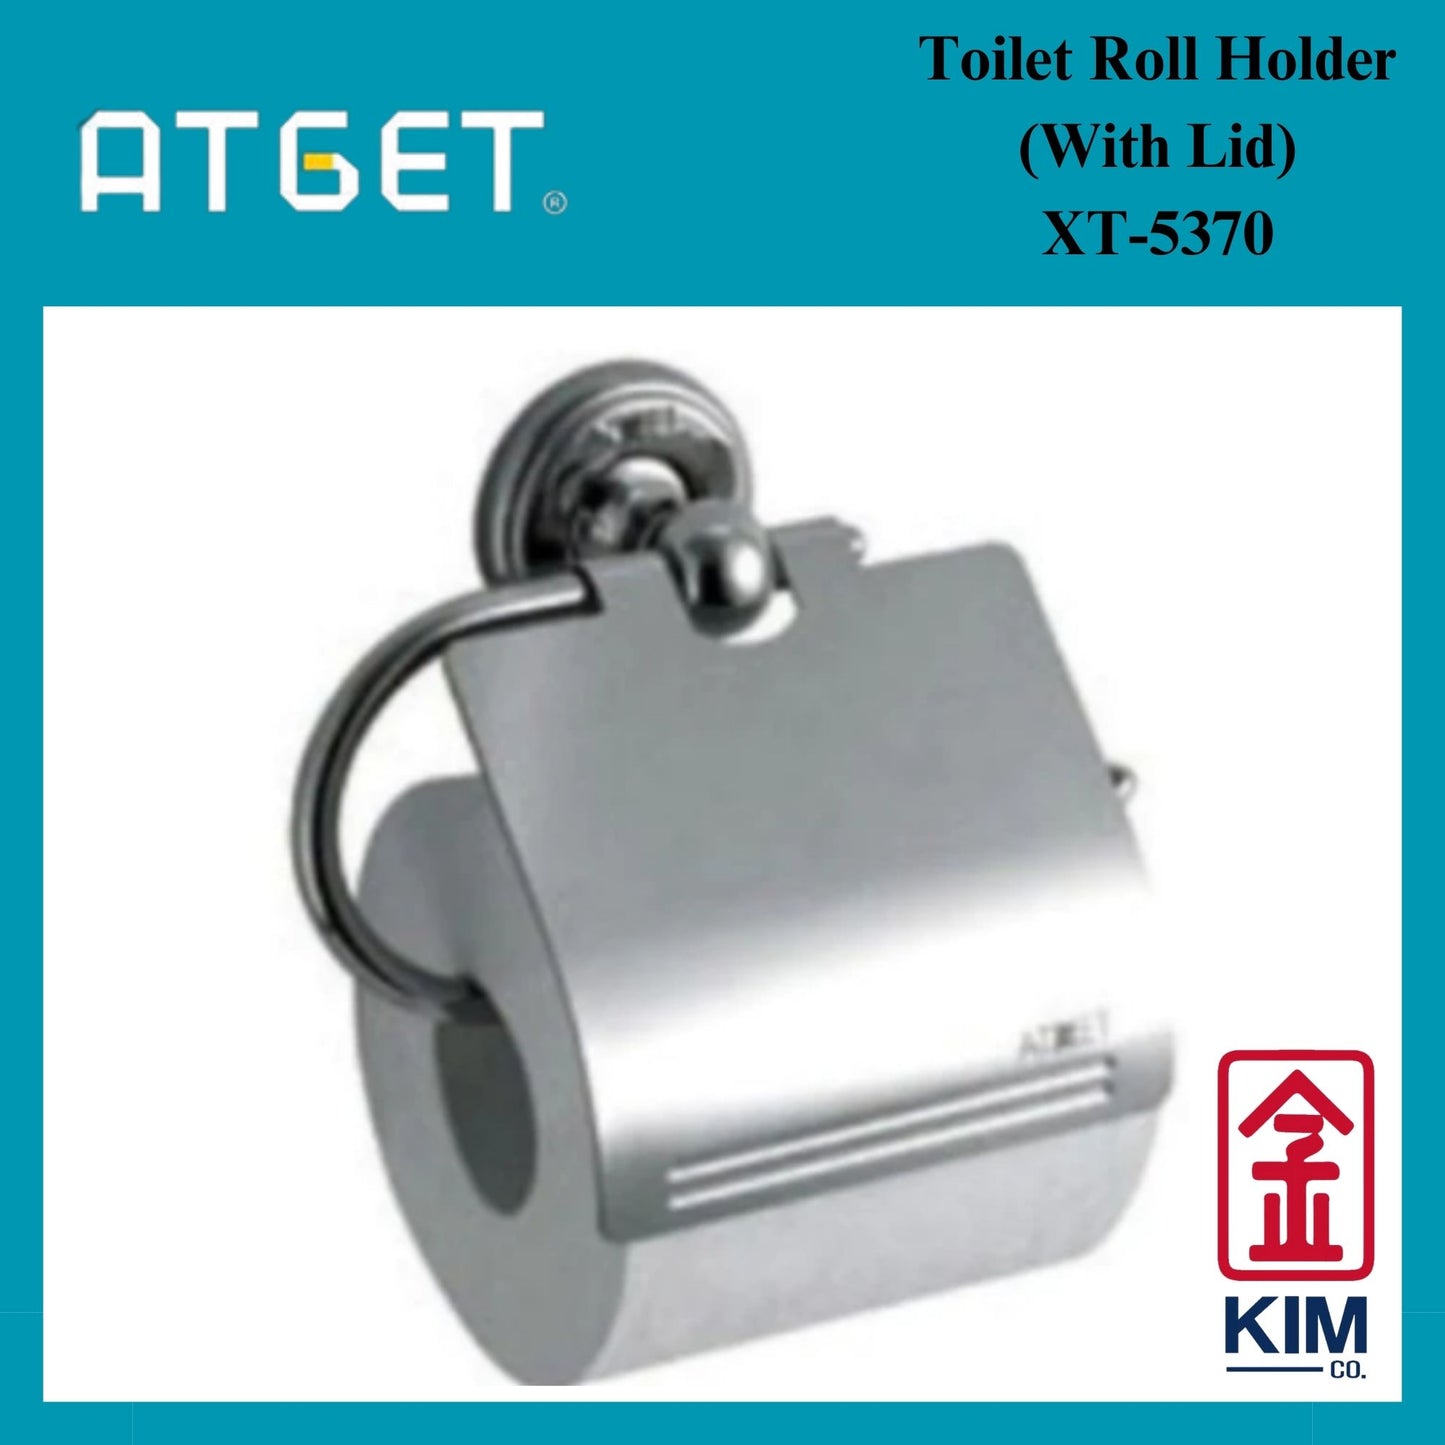 Atget Stainless Steel 304 Toilet Roll Holder With Lid (XT-5370)